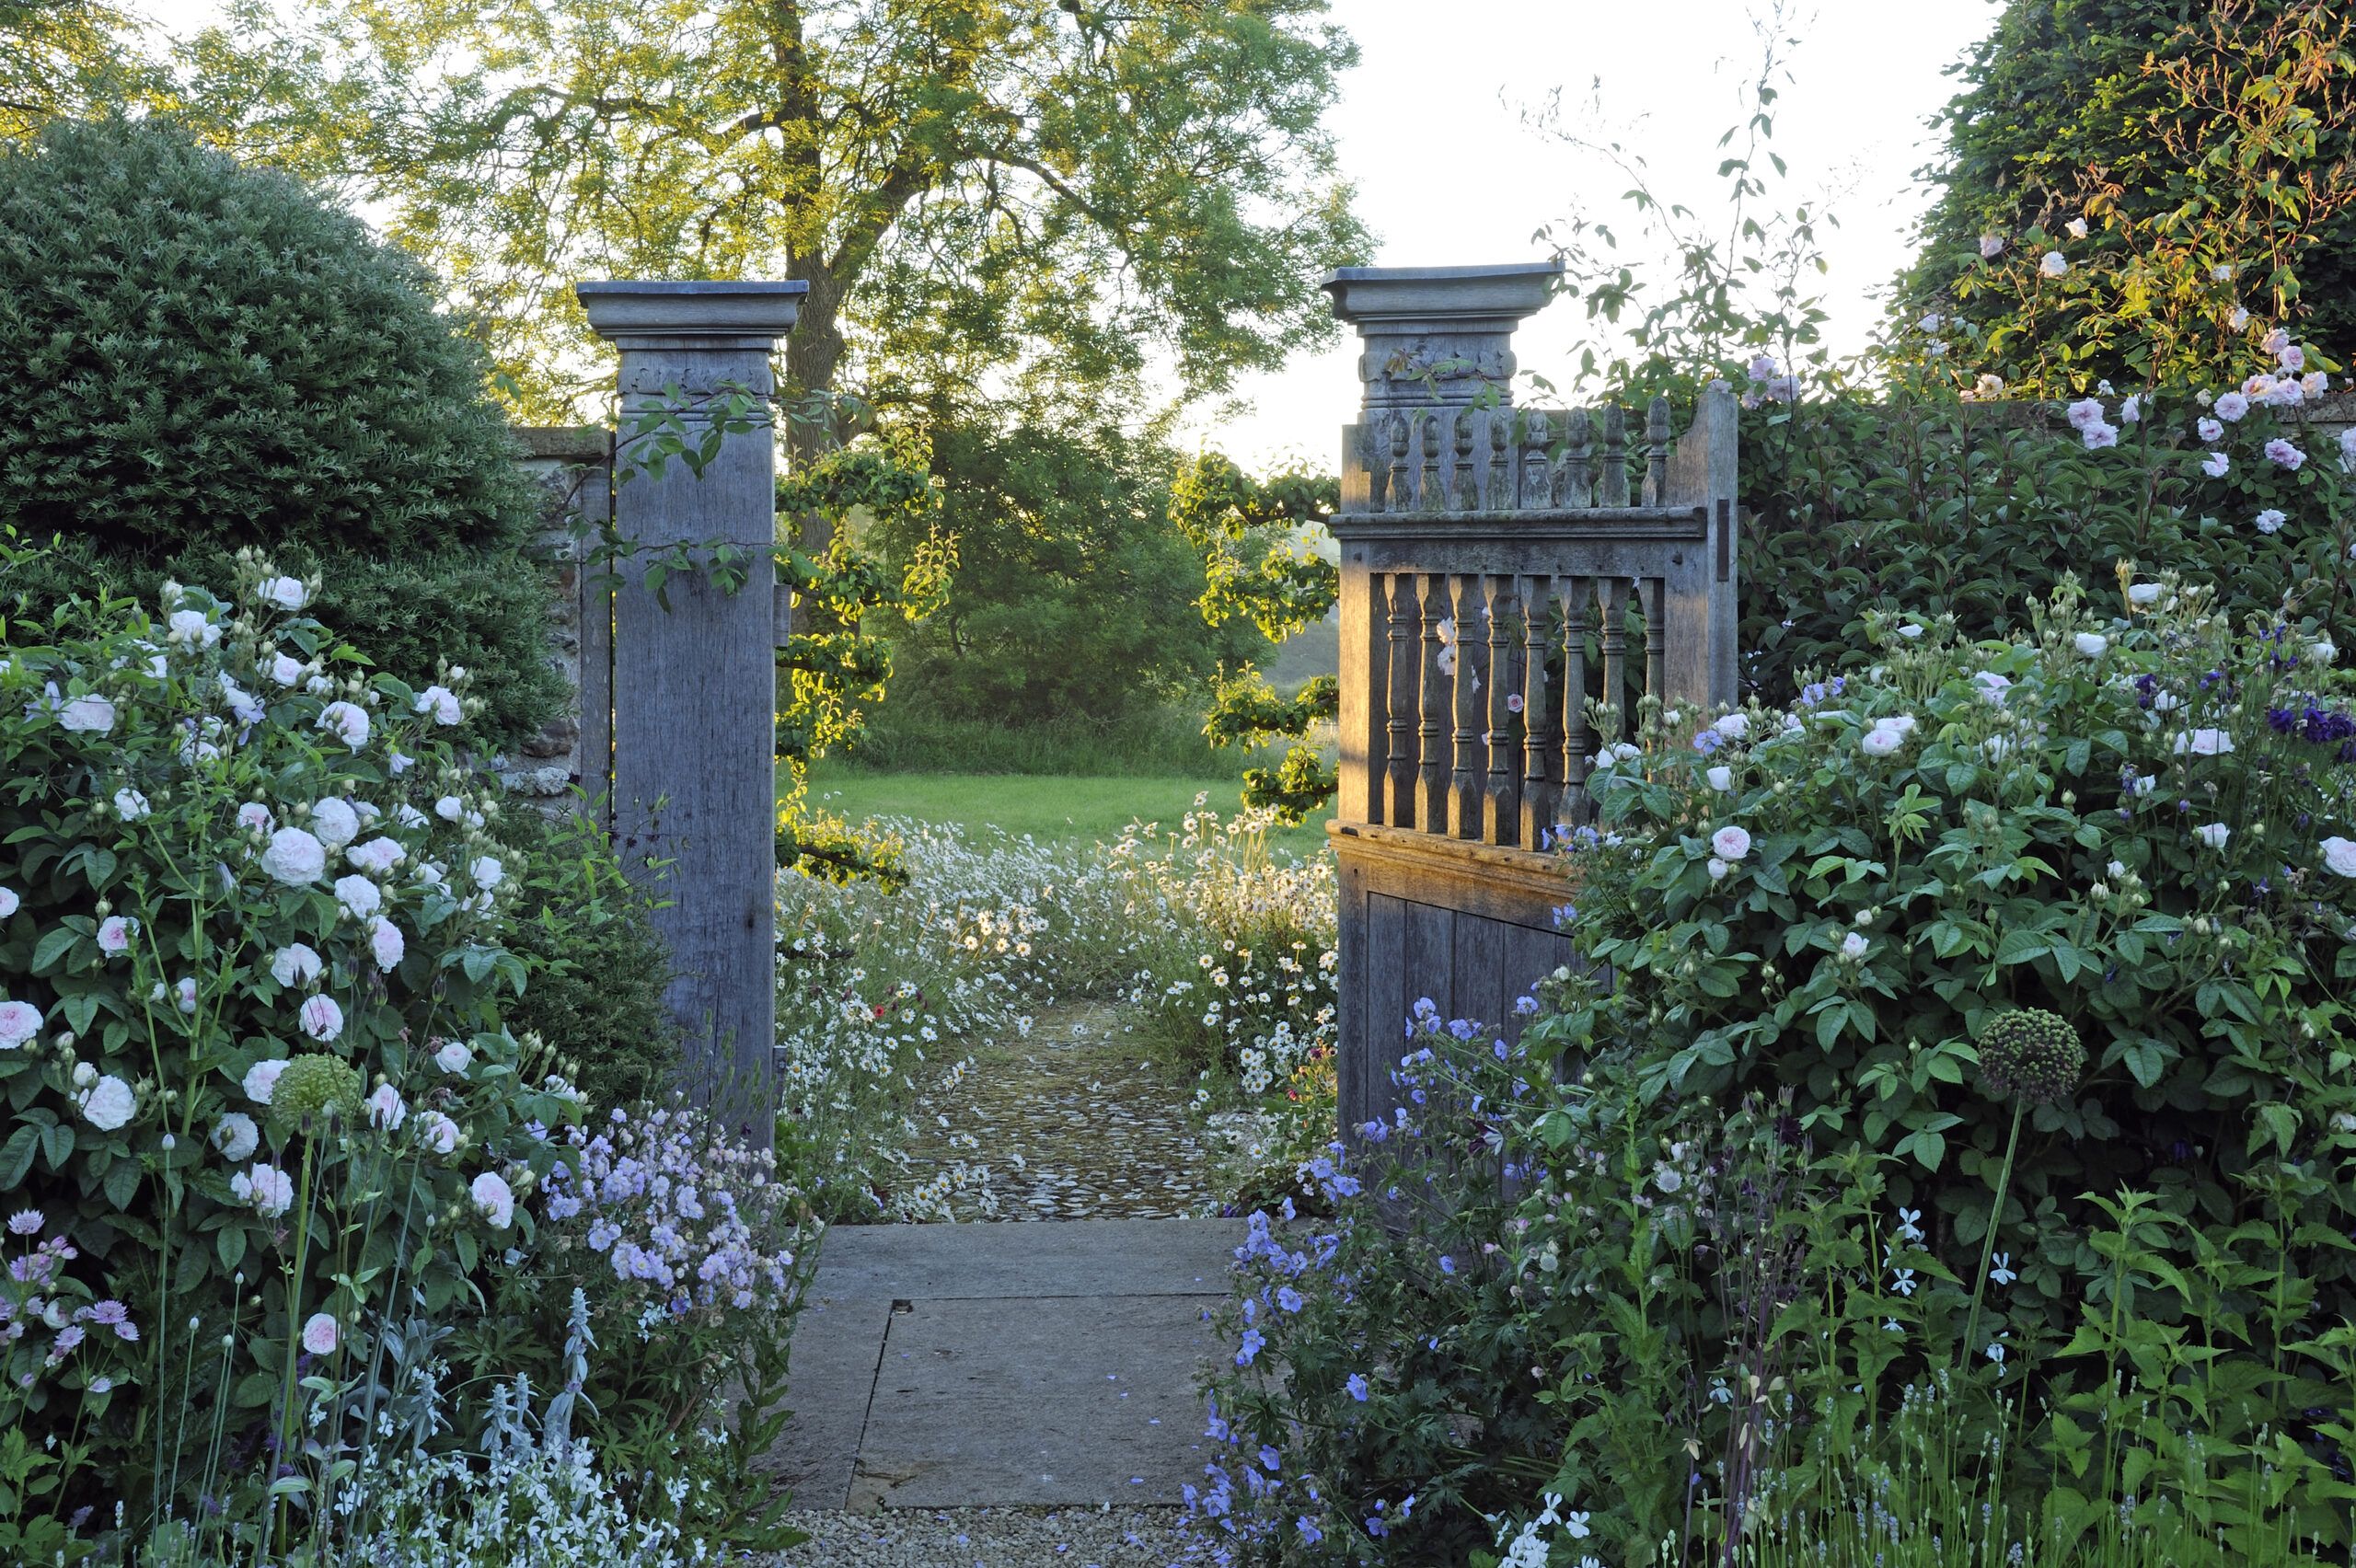 The Influential British Garden Designers of the Late 19th Century